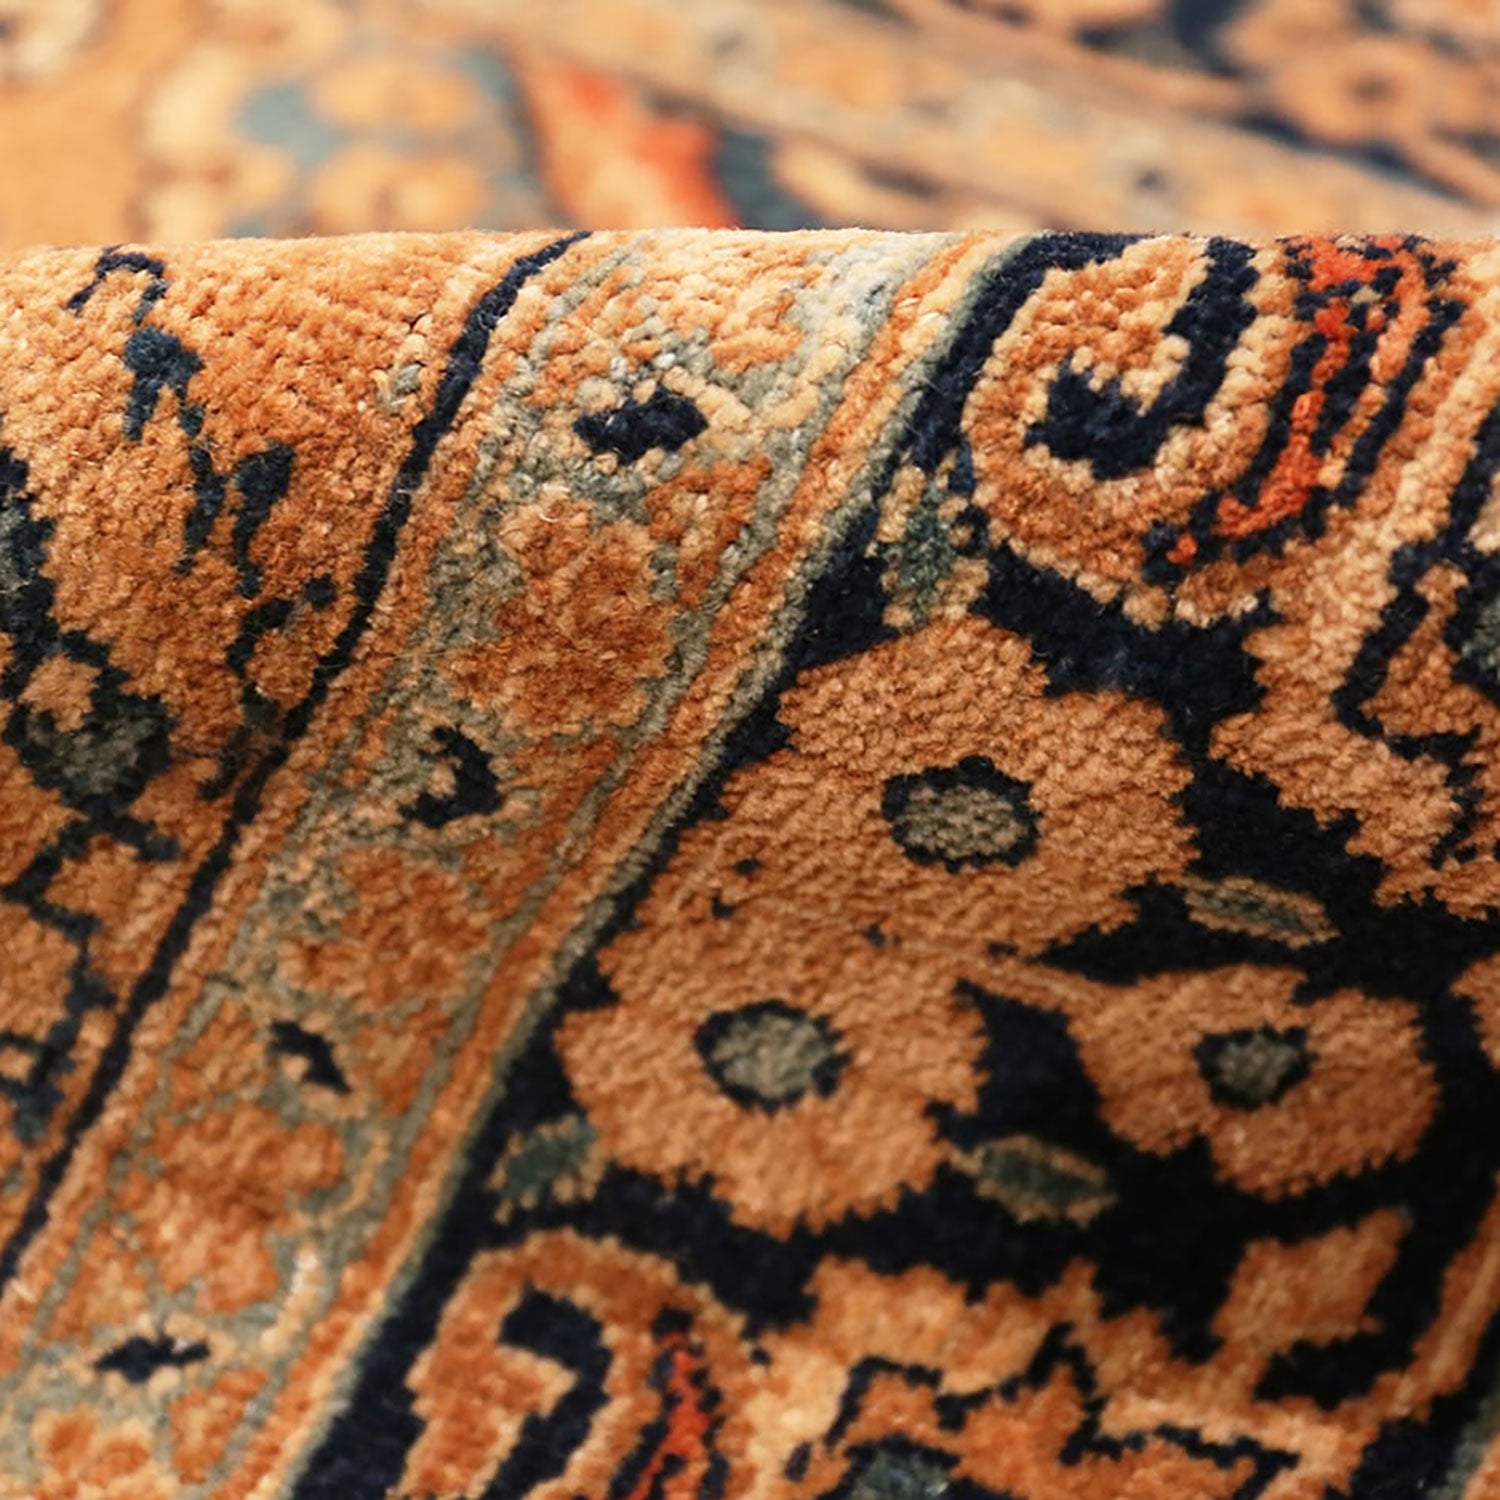 Intricately patterned rolled-up carpet in vibrant orange, beige, and blue.